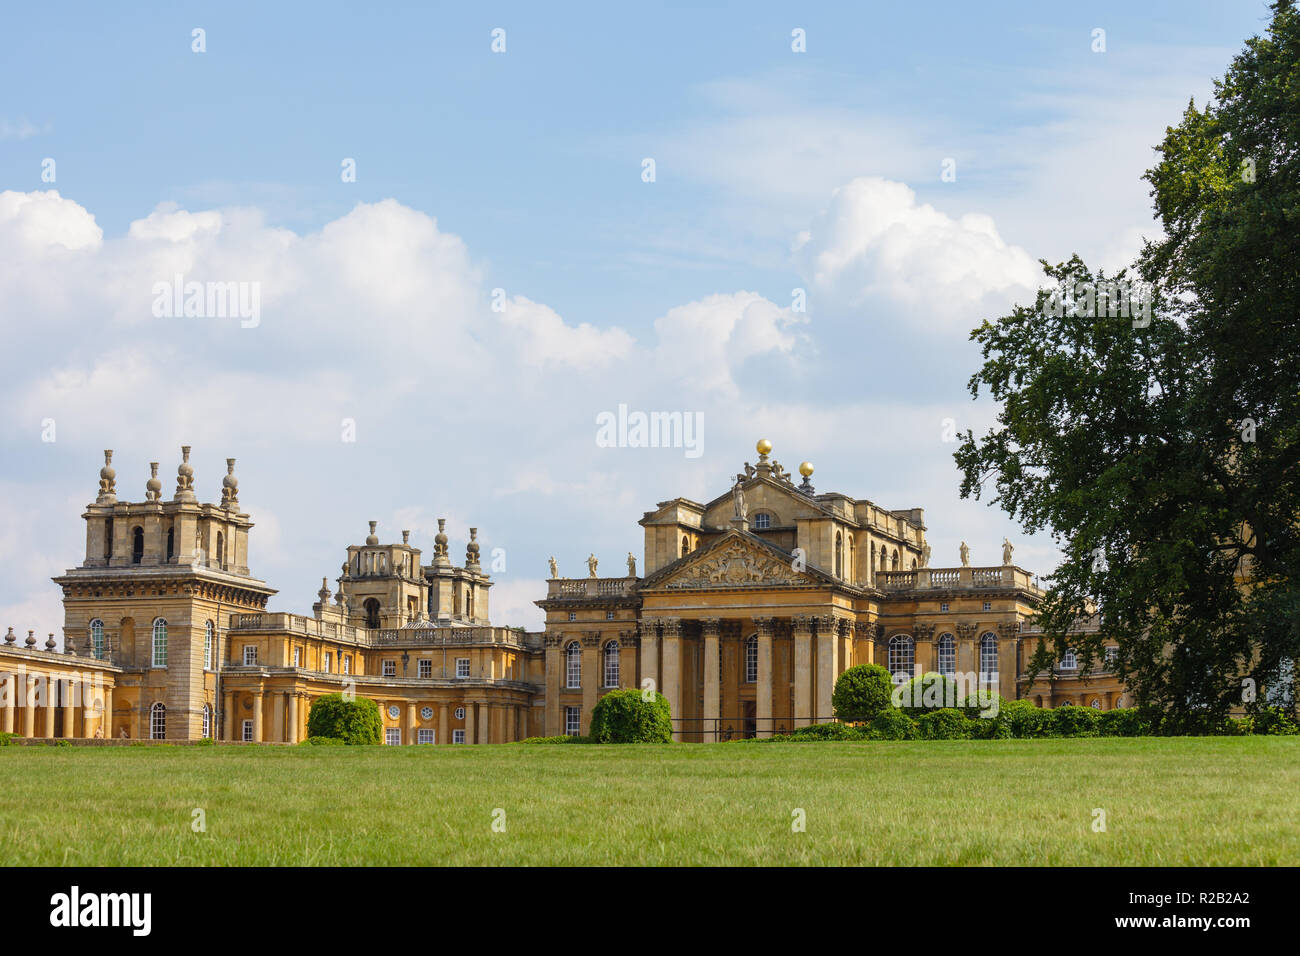 Blenheim Palace, a country house in Blenheim, Oxfordshire, England Stock Photo